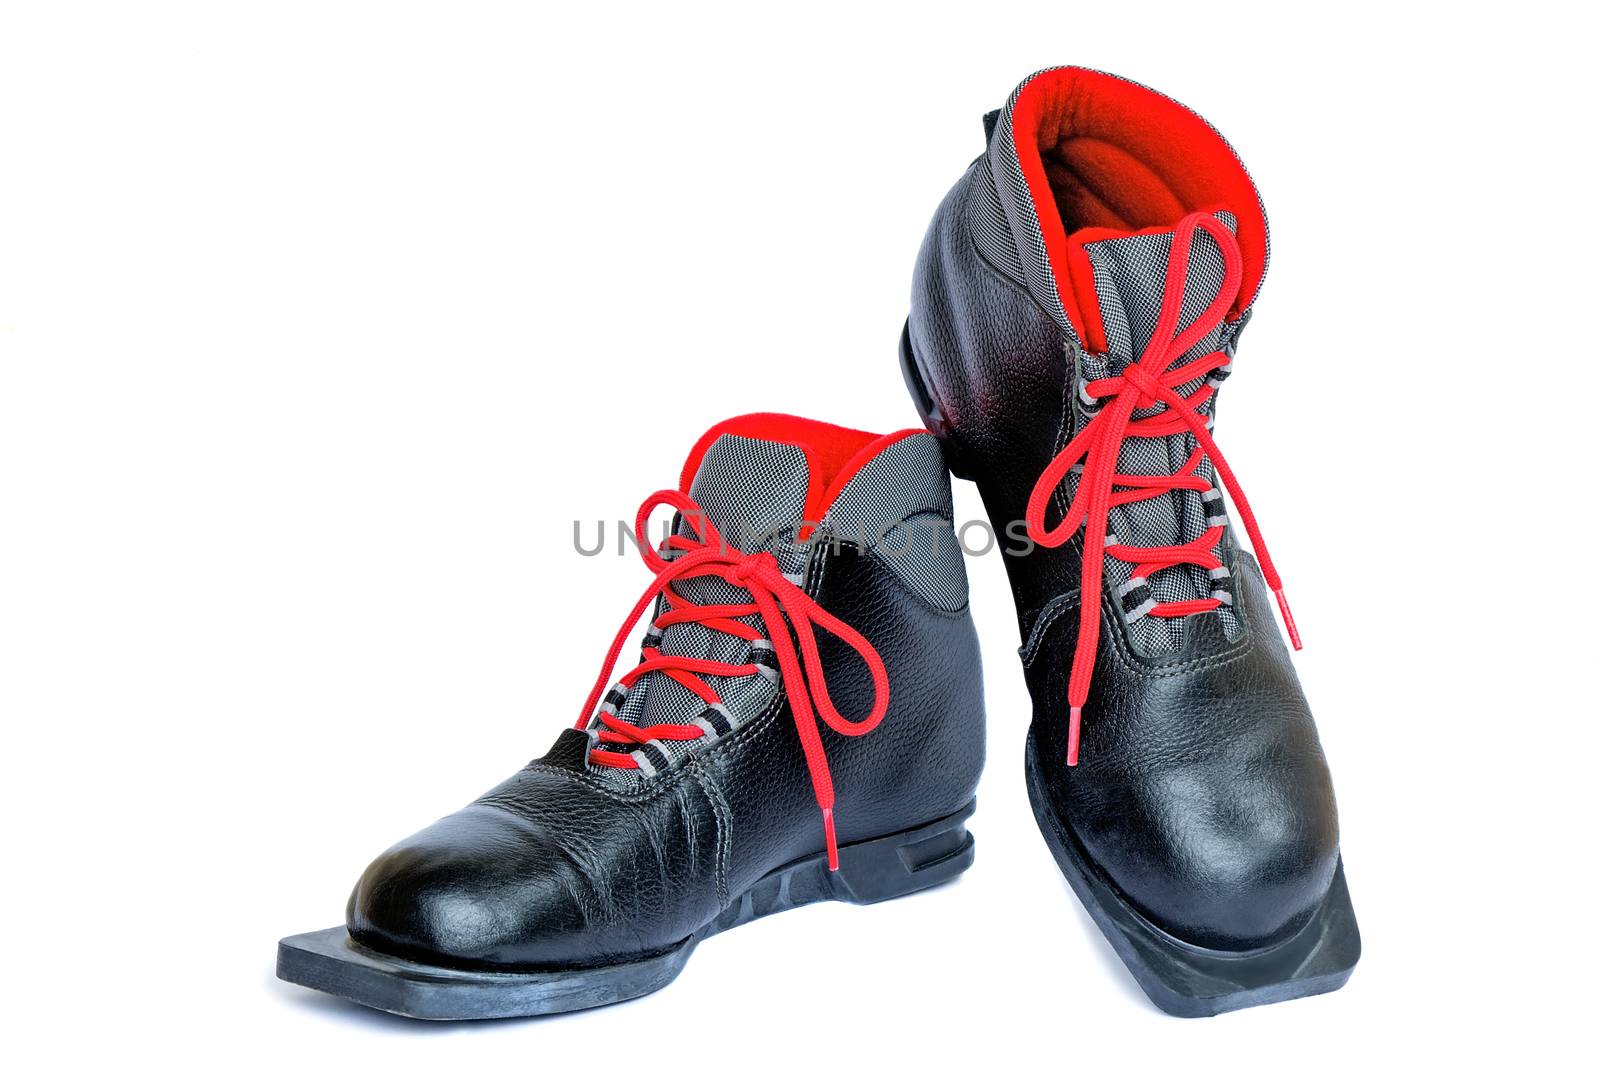 Black boots with red finishing for skiing. Are presented on a white background.